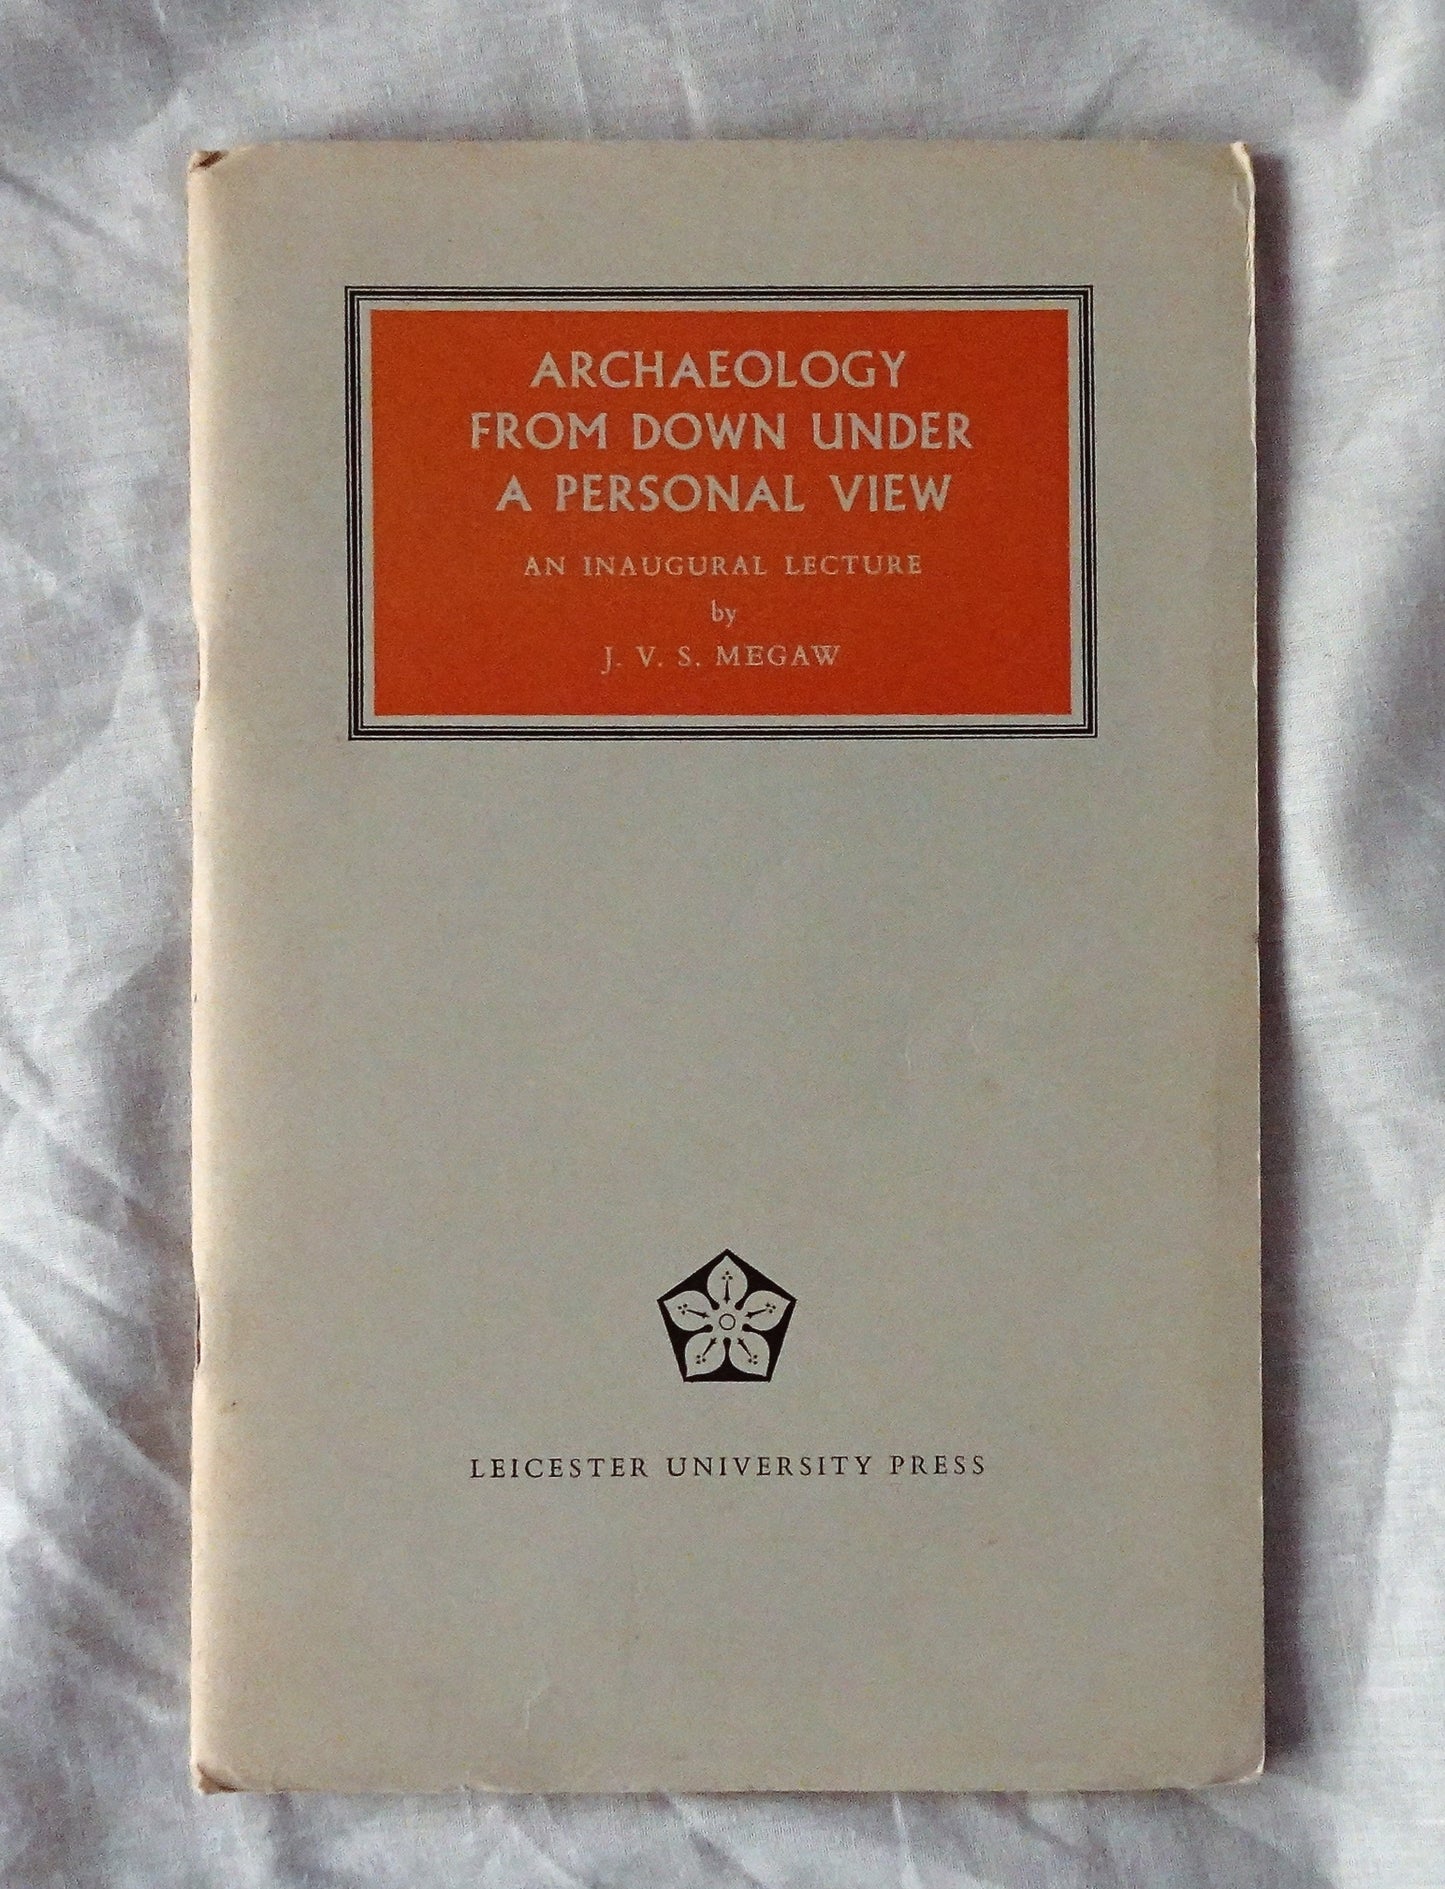 Archaeology From Down Under  A Personal View  An Inaugural Lecture delivered in the University Leicester 24 February 1973  by J. V. S. Megaw